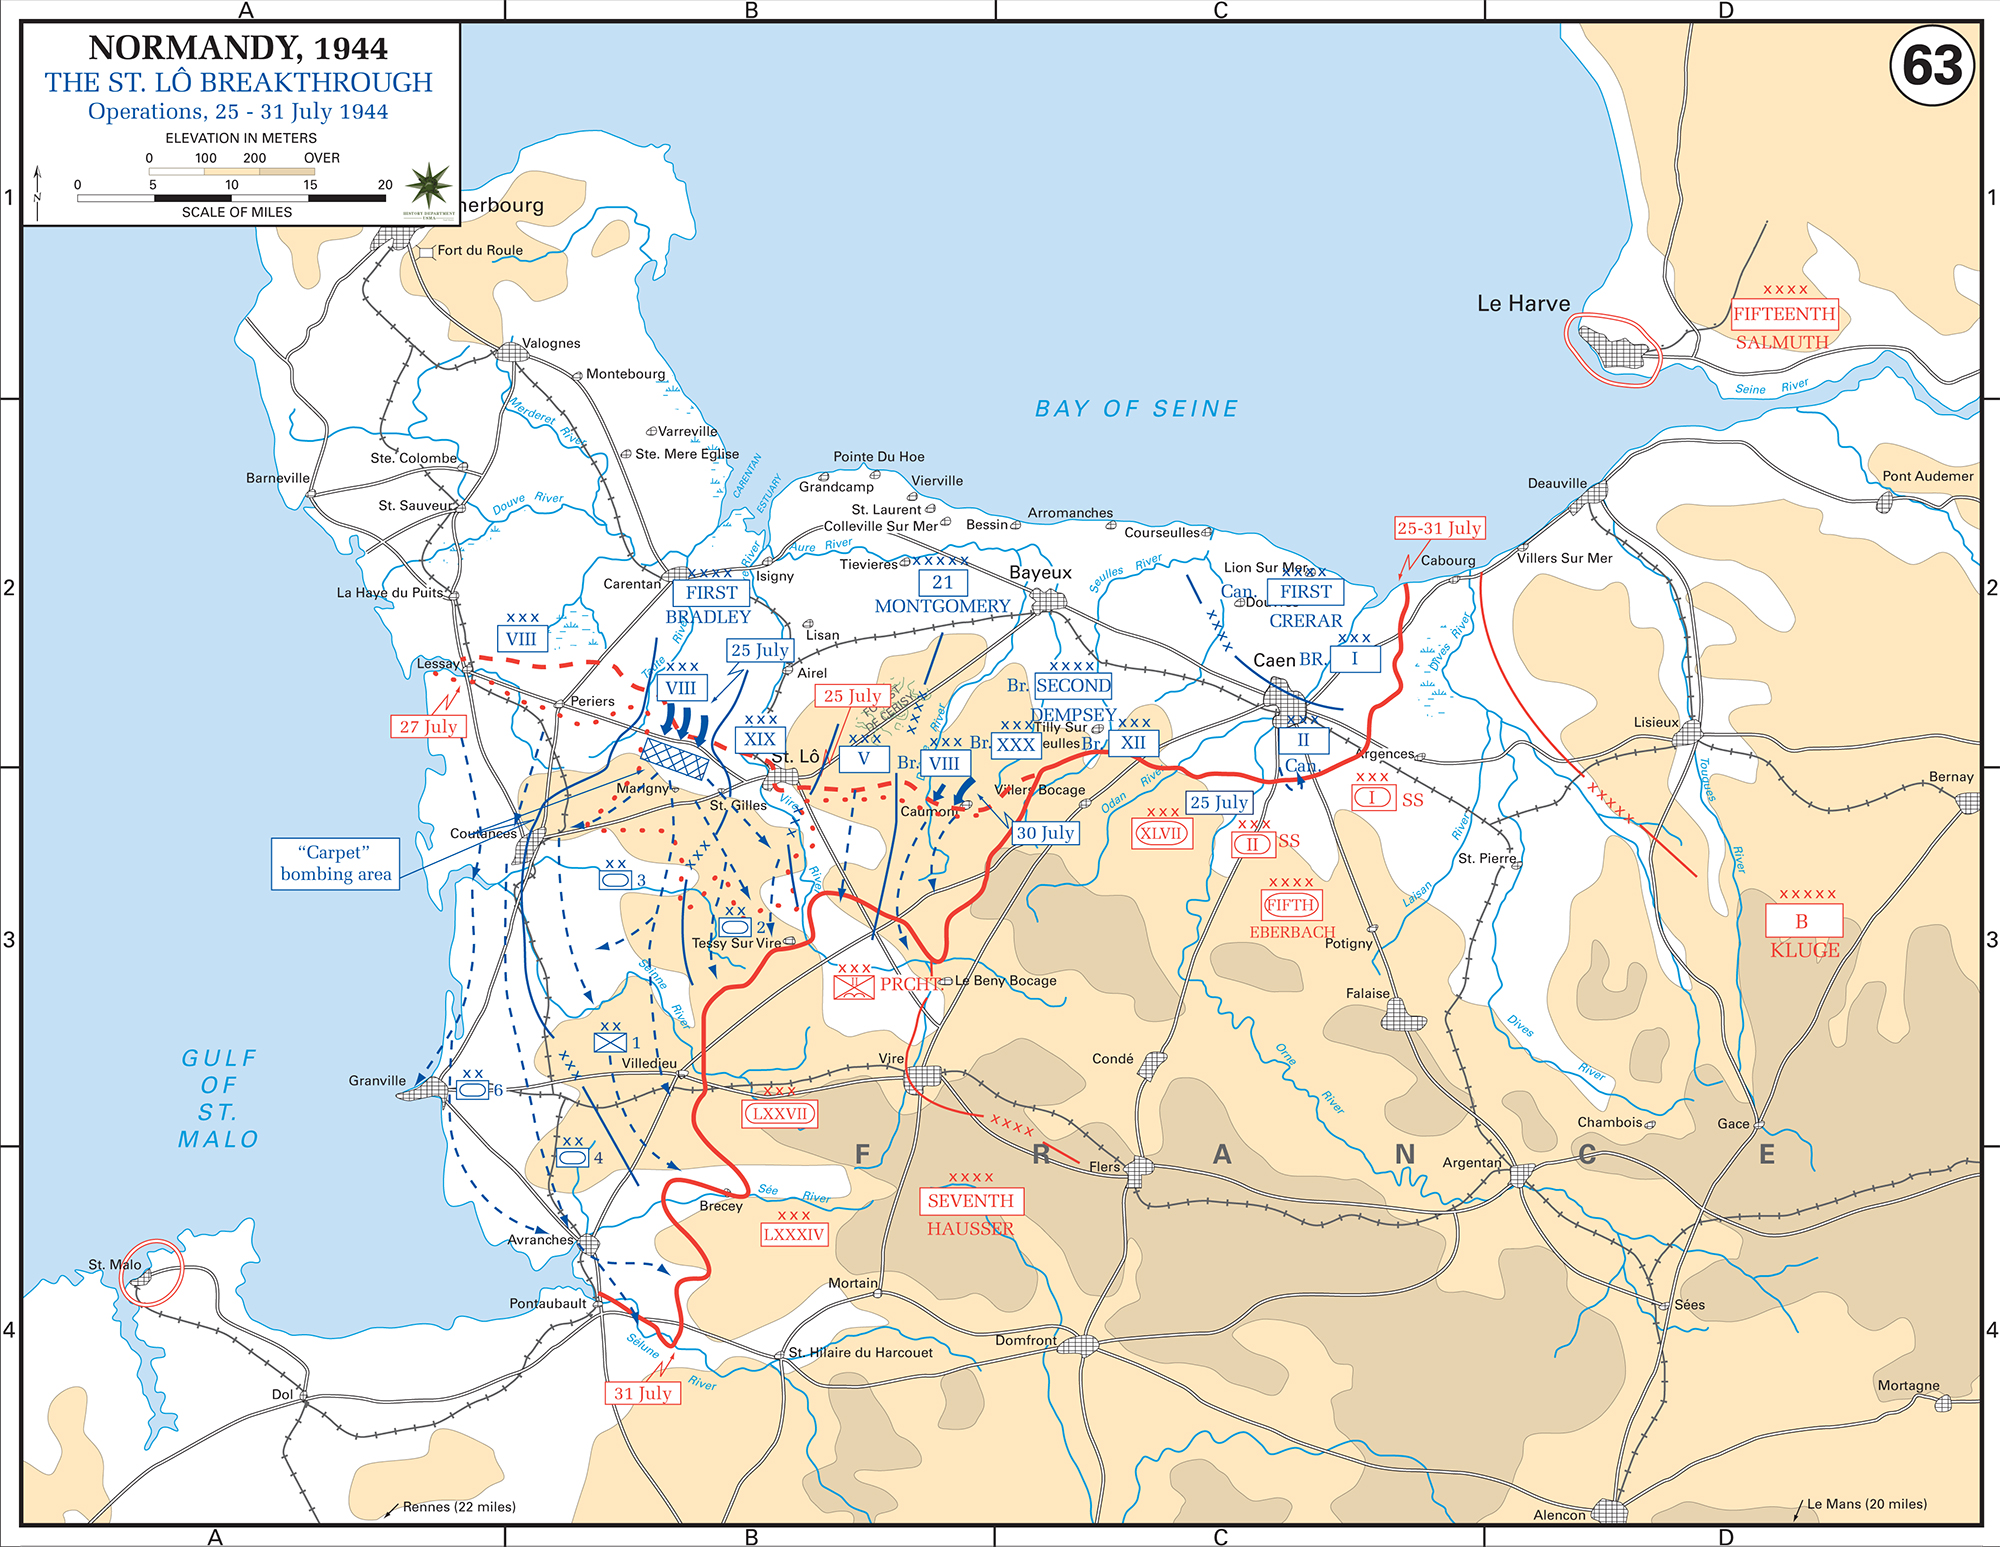 Map of WWII: Normandy Invasion. Operations July 25-31, 1944. The Saint-L (St. Lo) Breakthrough.